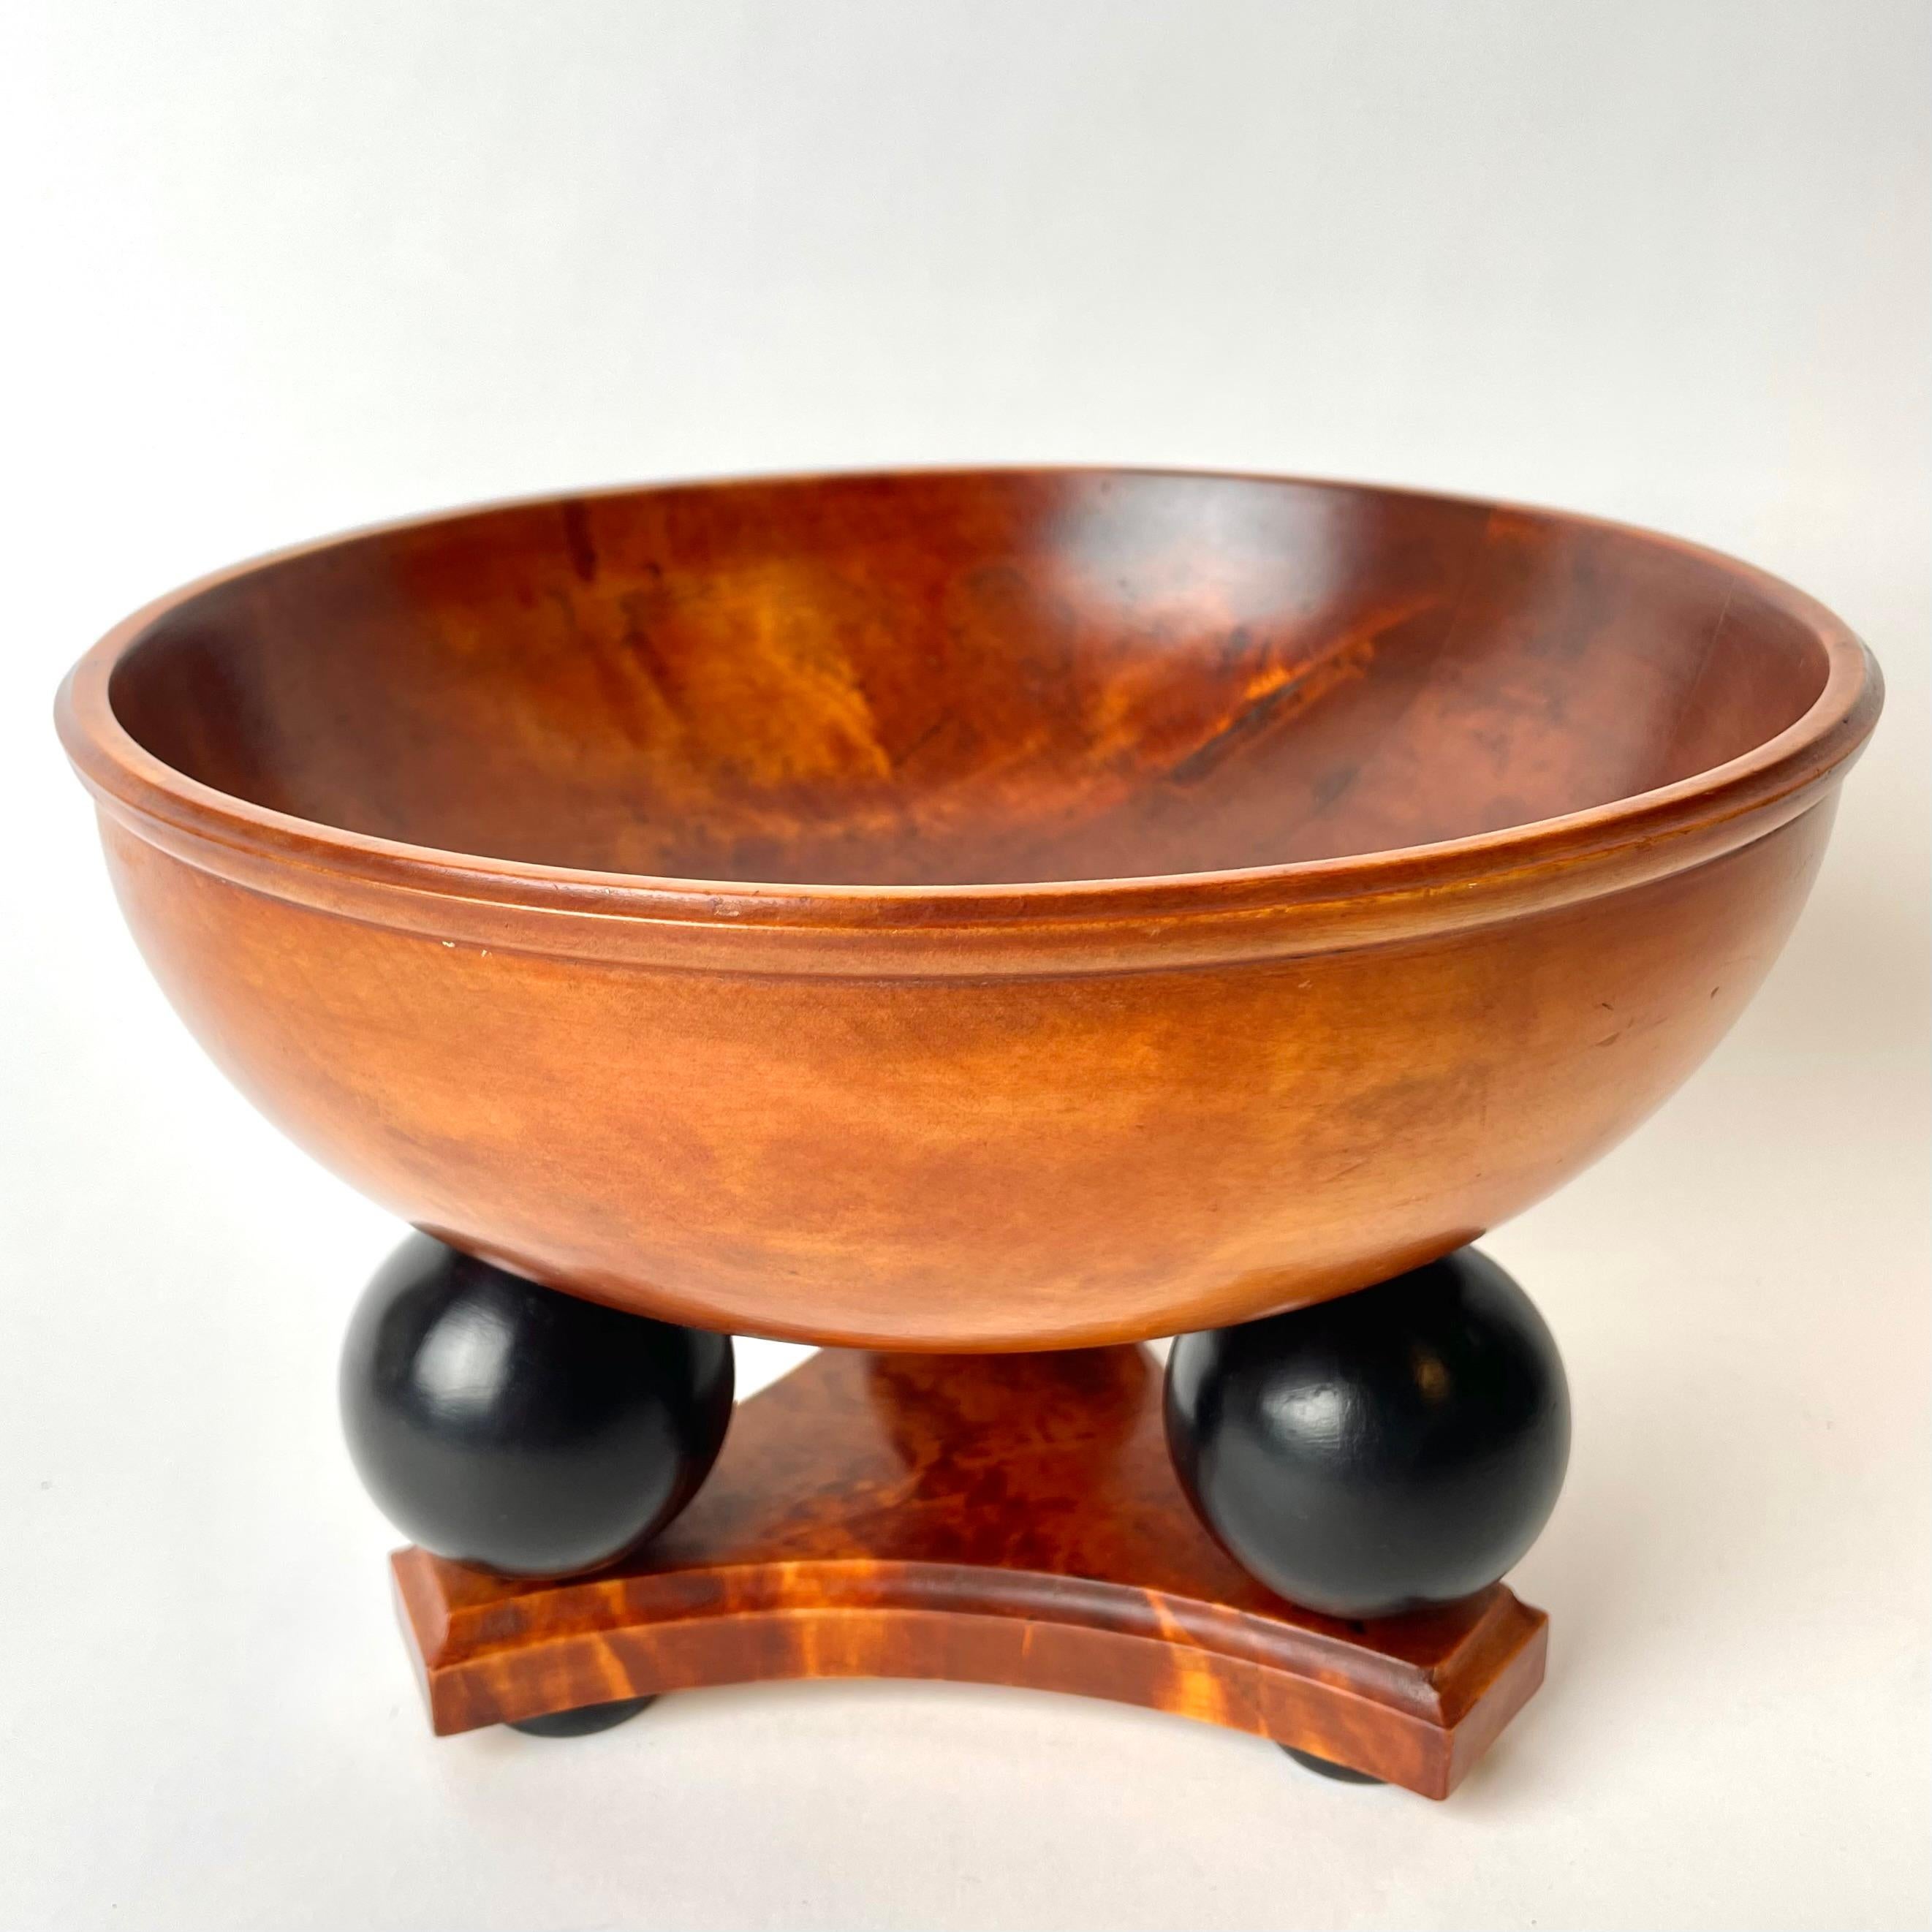 Very Sophisticated Swedish Bowl in flame birch, with large blackened balls. Rare and elegante Swedish Art Deco from the 1920s or 1930s.


Wear consistent with age and use.